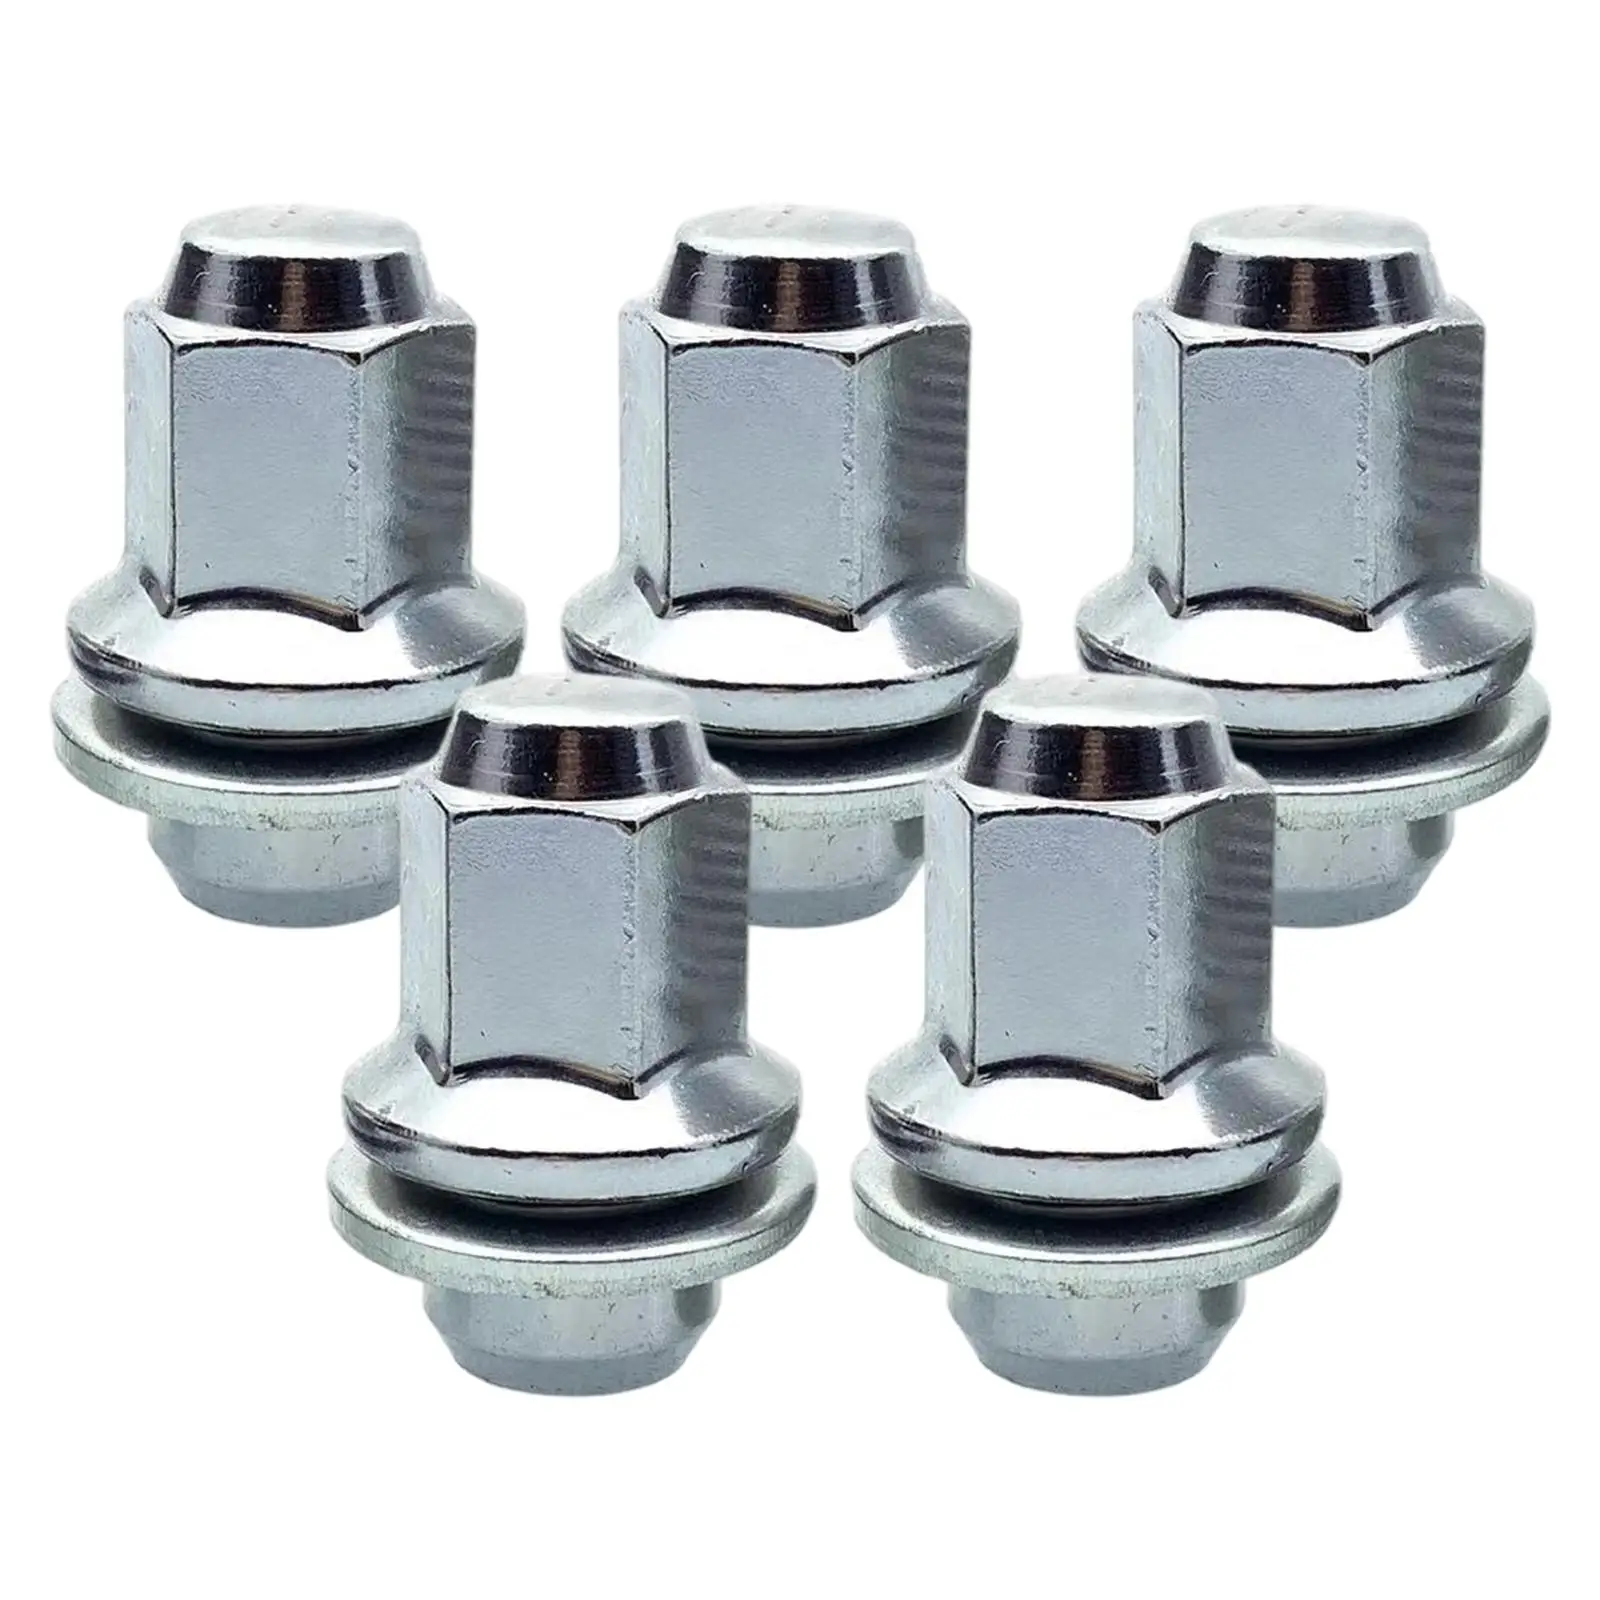 5x Wheel Lug Nut Stainless Steel Fit for Xks Accessories Parts